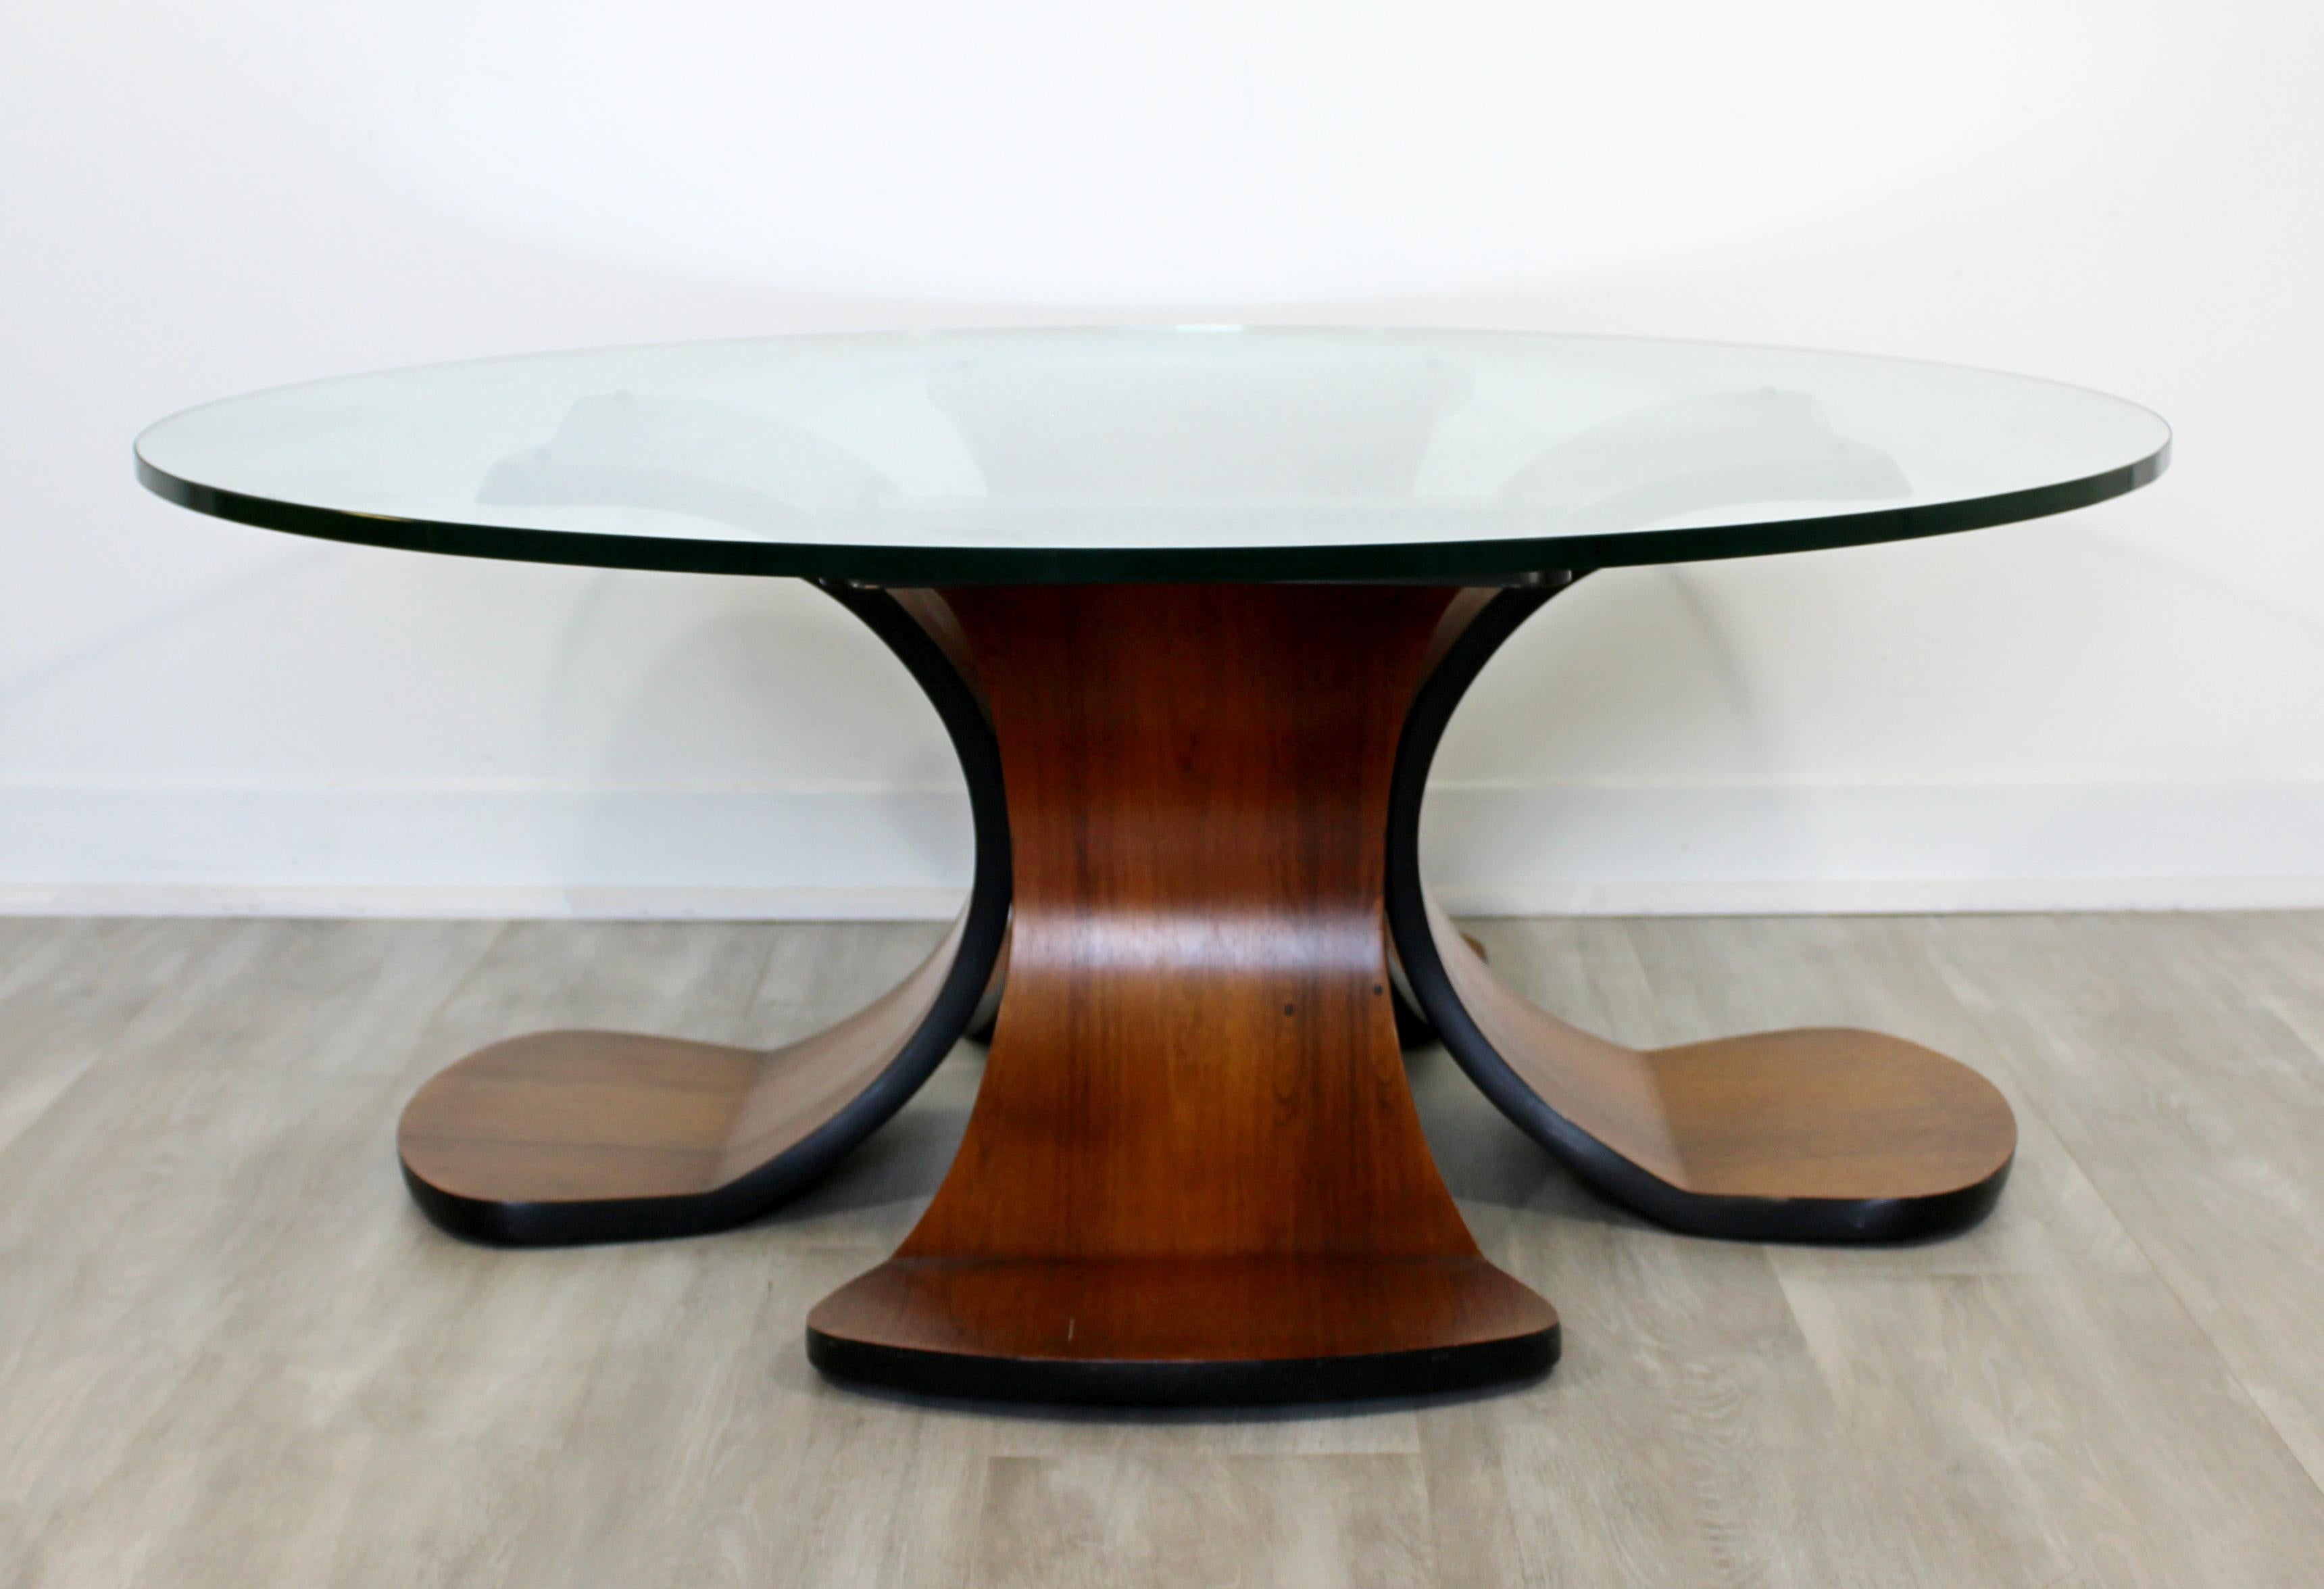 American Mid-Century Modern Sculptural Bentwood Walnut Rosewood Glass Coffee Table, 1960s